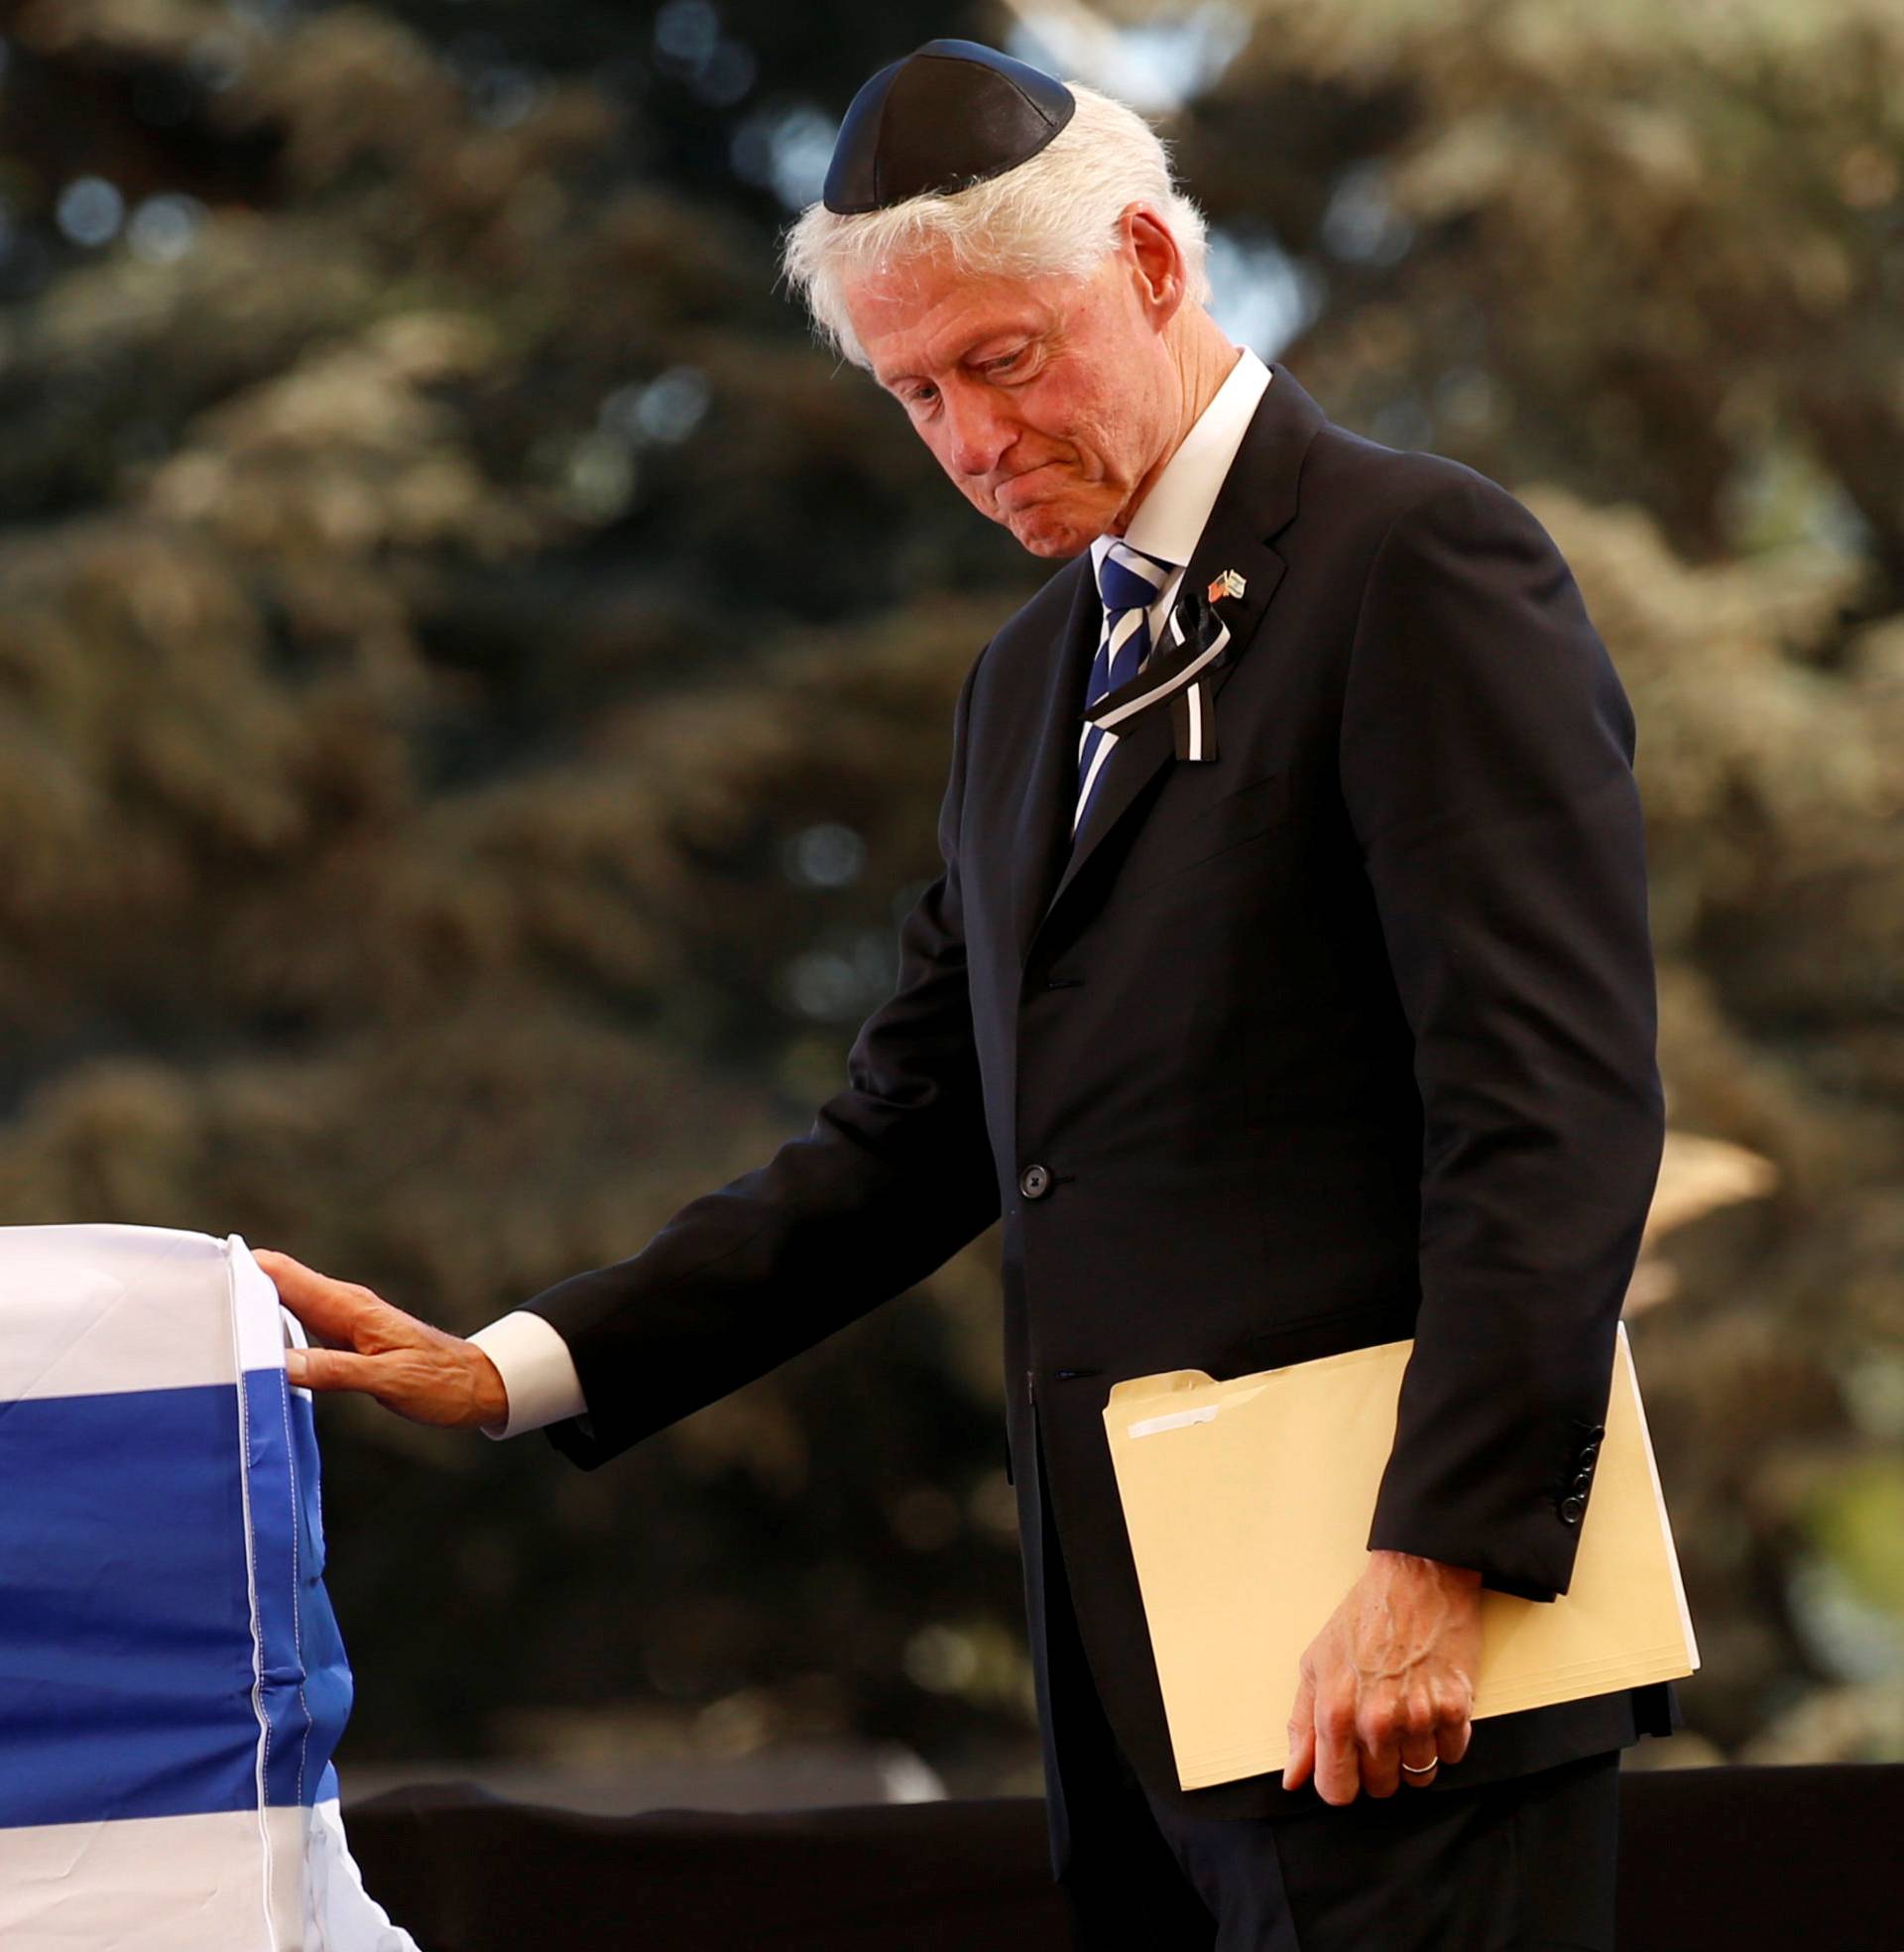 Former US President Bill Clinton stands in front of the flag-draped coffin of the former Israeli President Shimon Peres, during the funeral ceremony at Mount Herzl cemetery in Jerusalem 